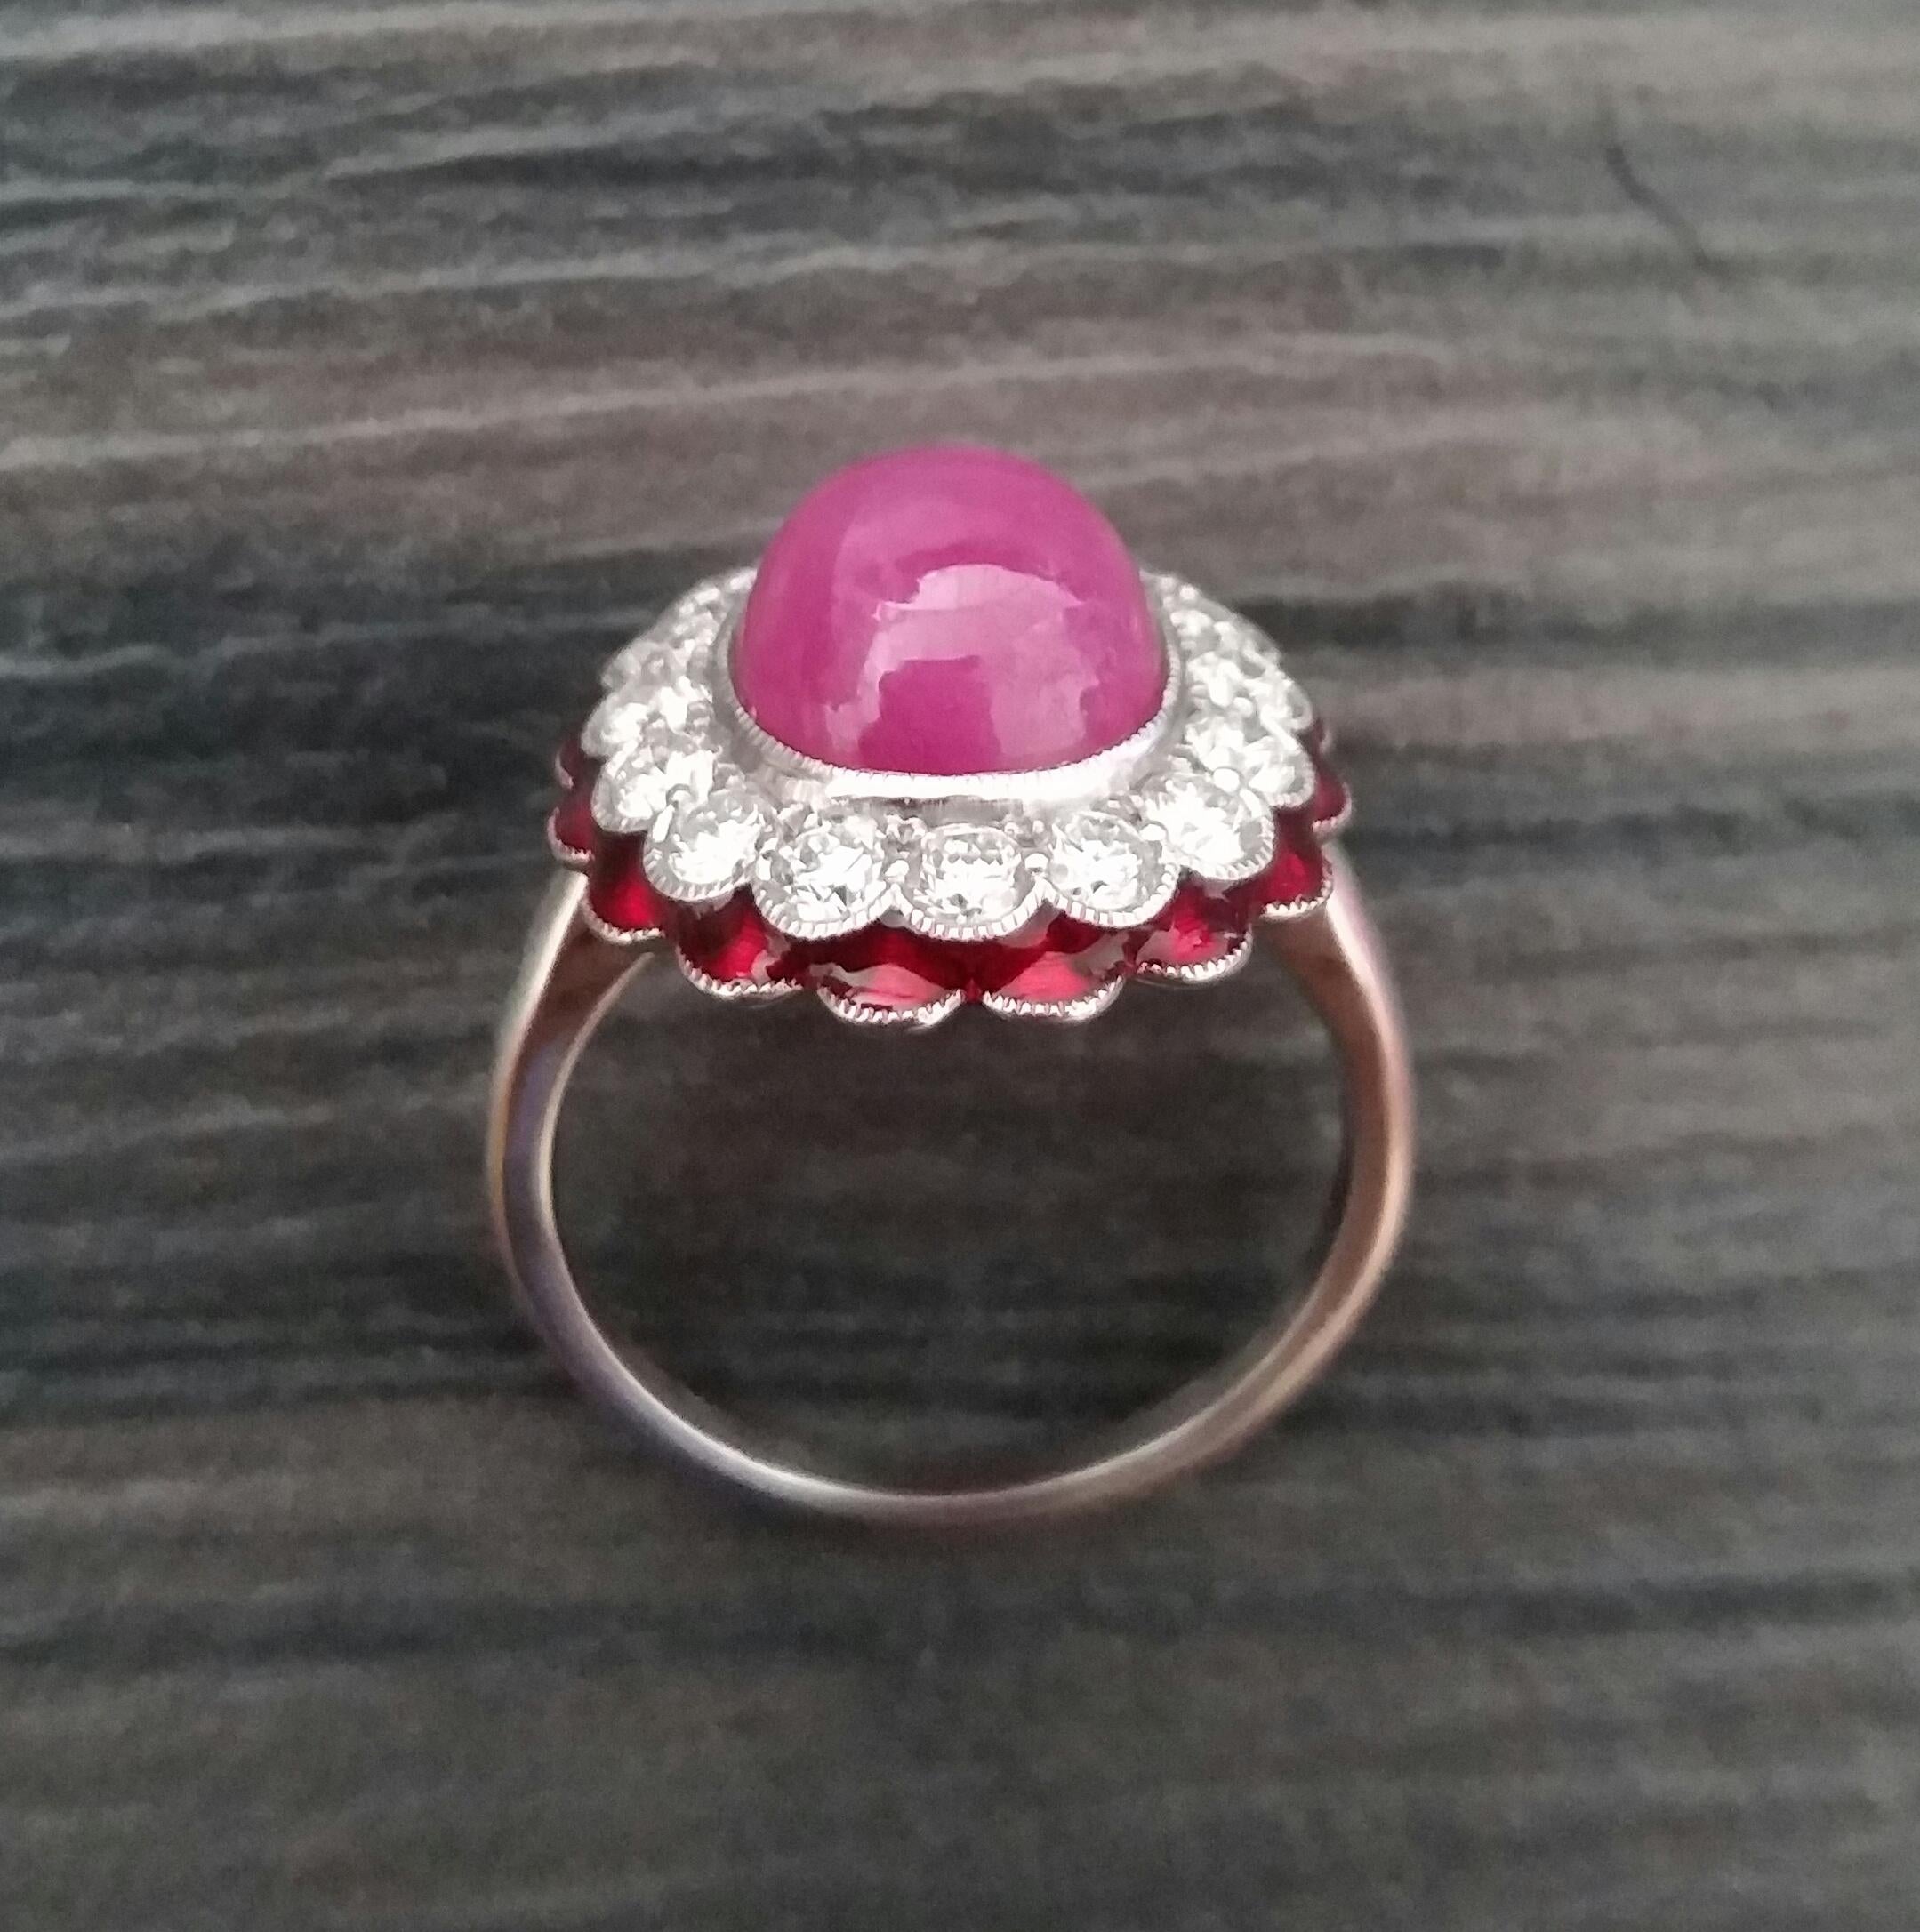 10 Carat Oval Ruby Cab 1 Carat Diamonds Red Enamel 14K White Gold Cocktail Ring For Sale 3